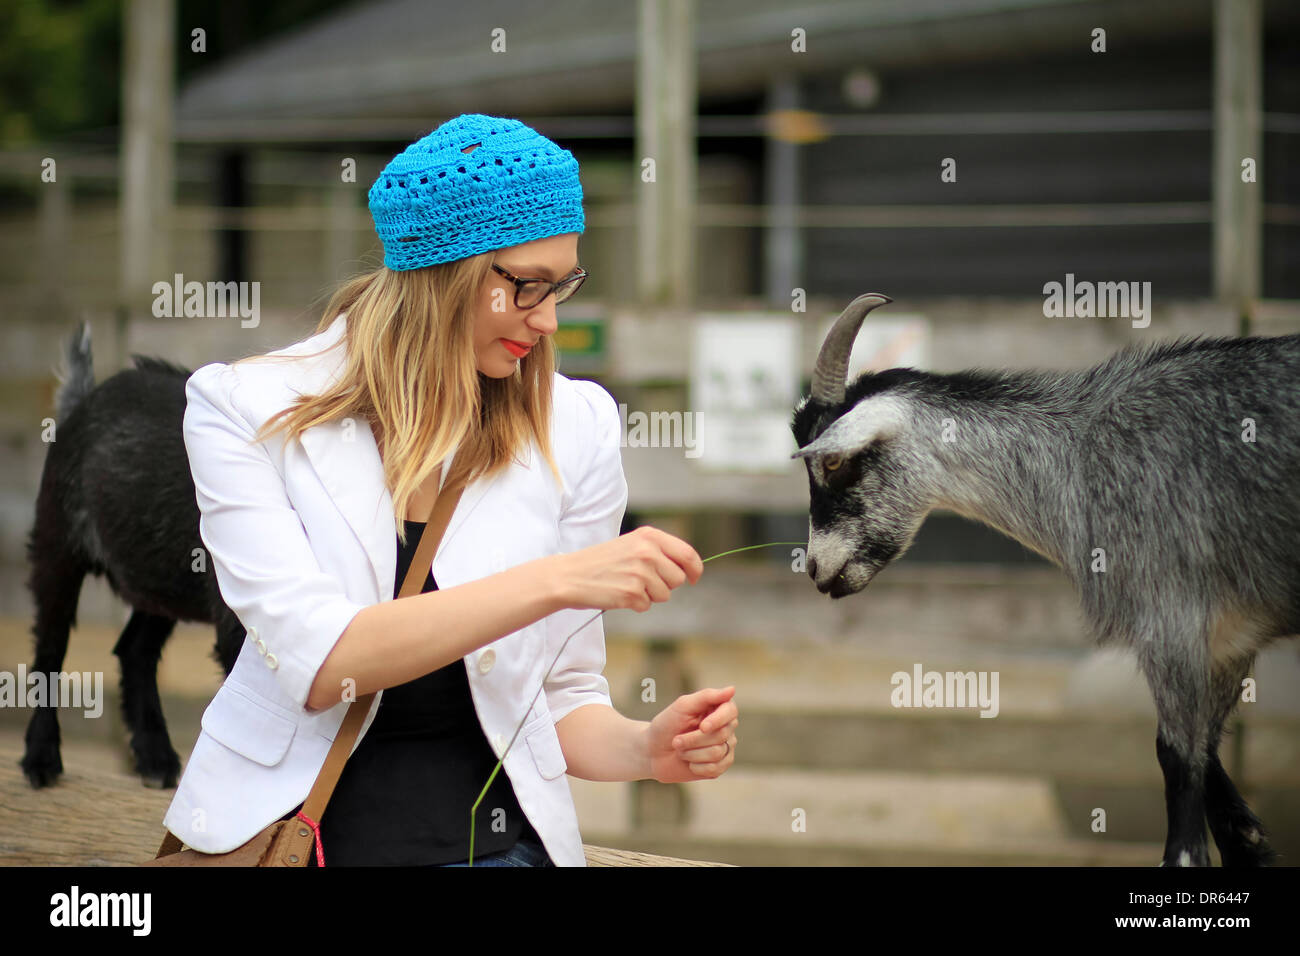 Young woman with knit hat playing with goat, Copenhagen, Denmark Stock Photo